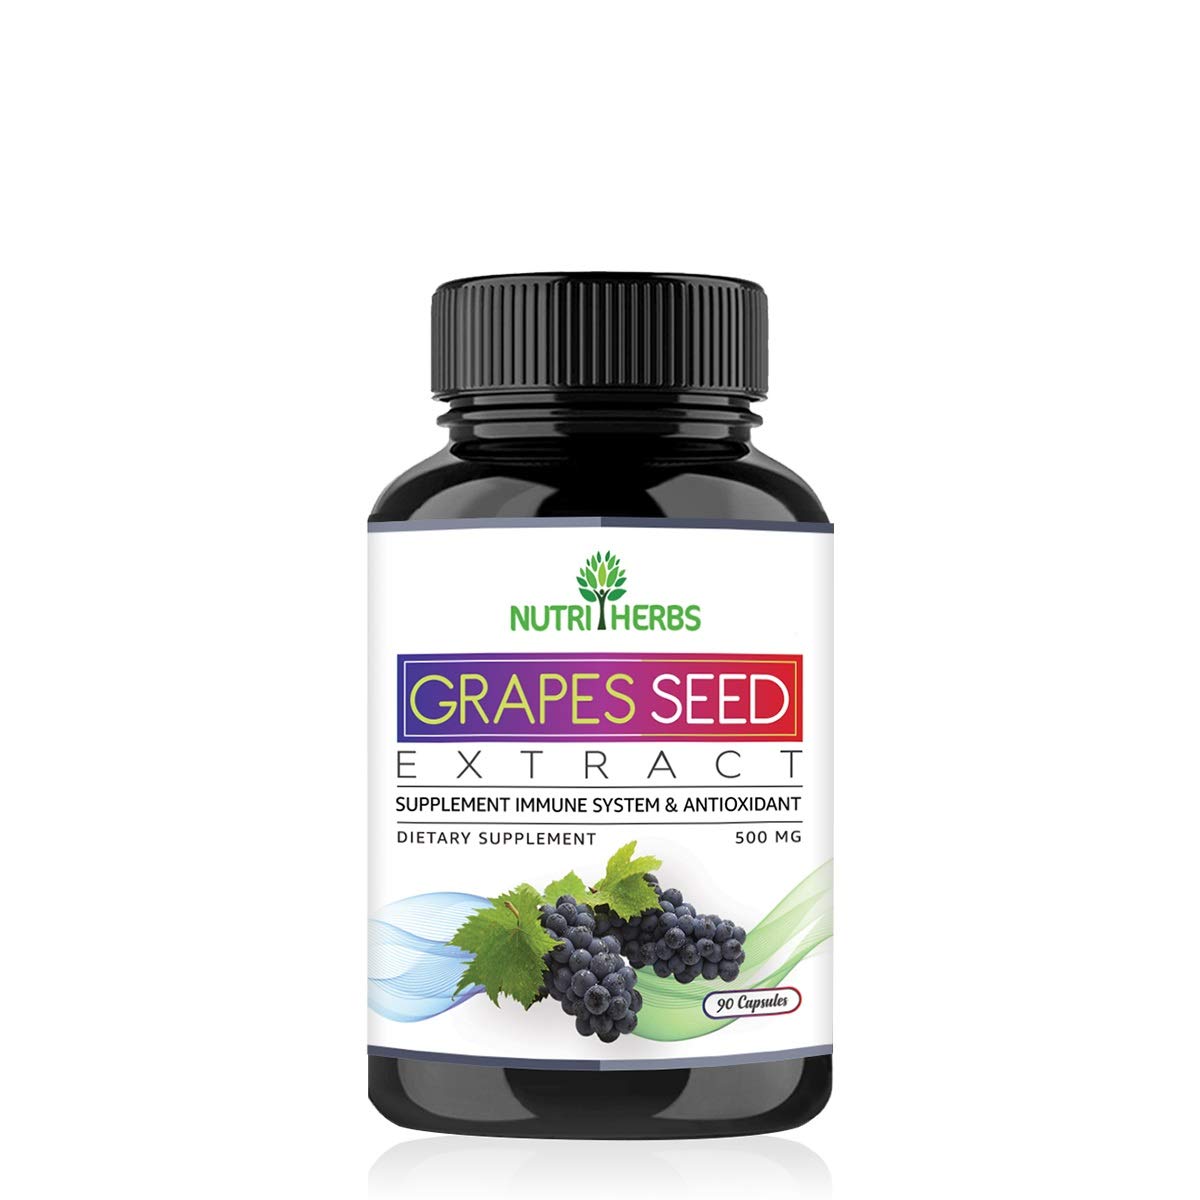 Nutriherbs Grapes Seed Pure Extract Support Image